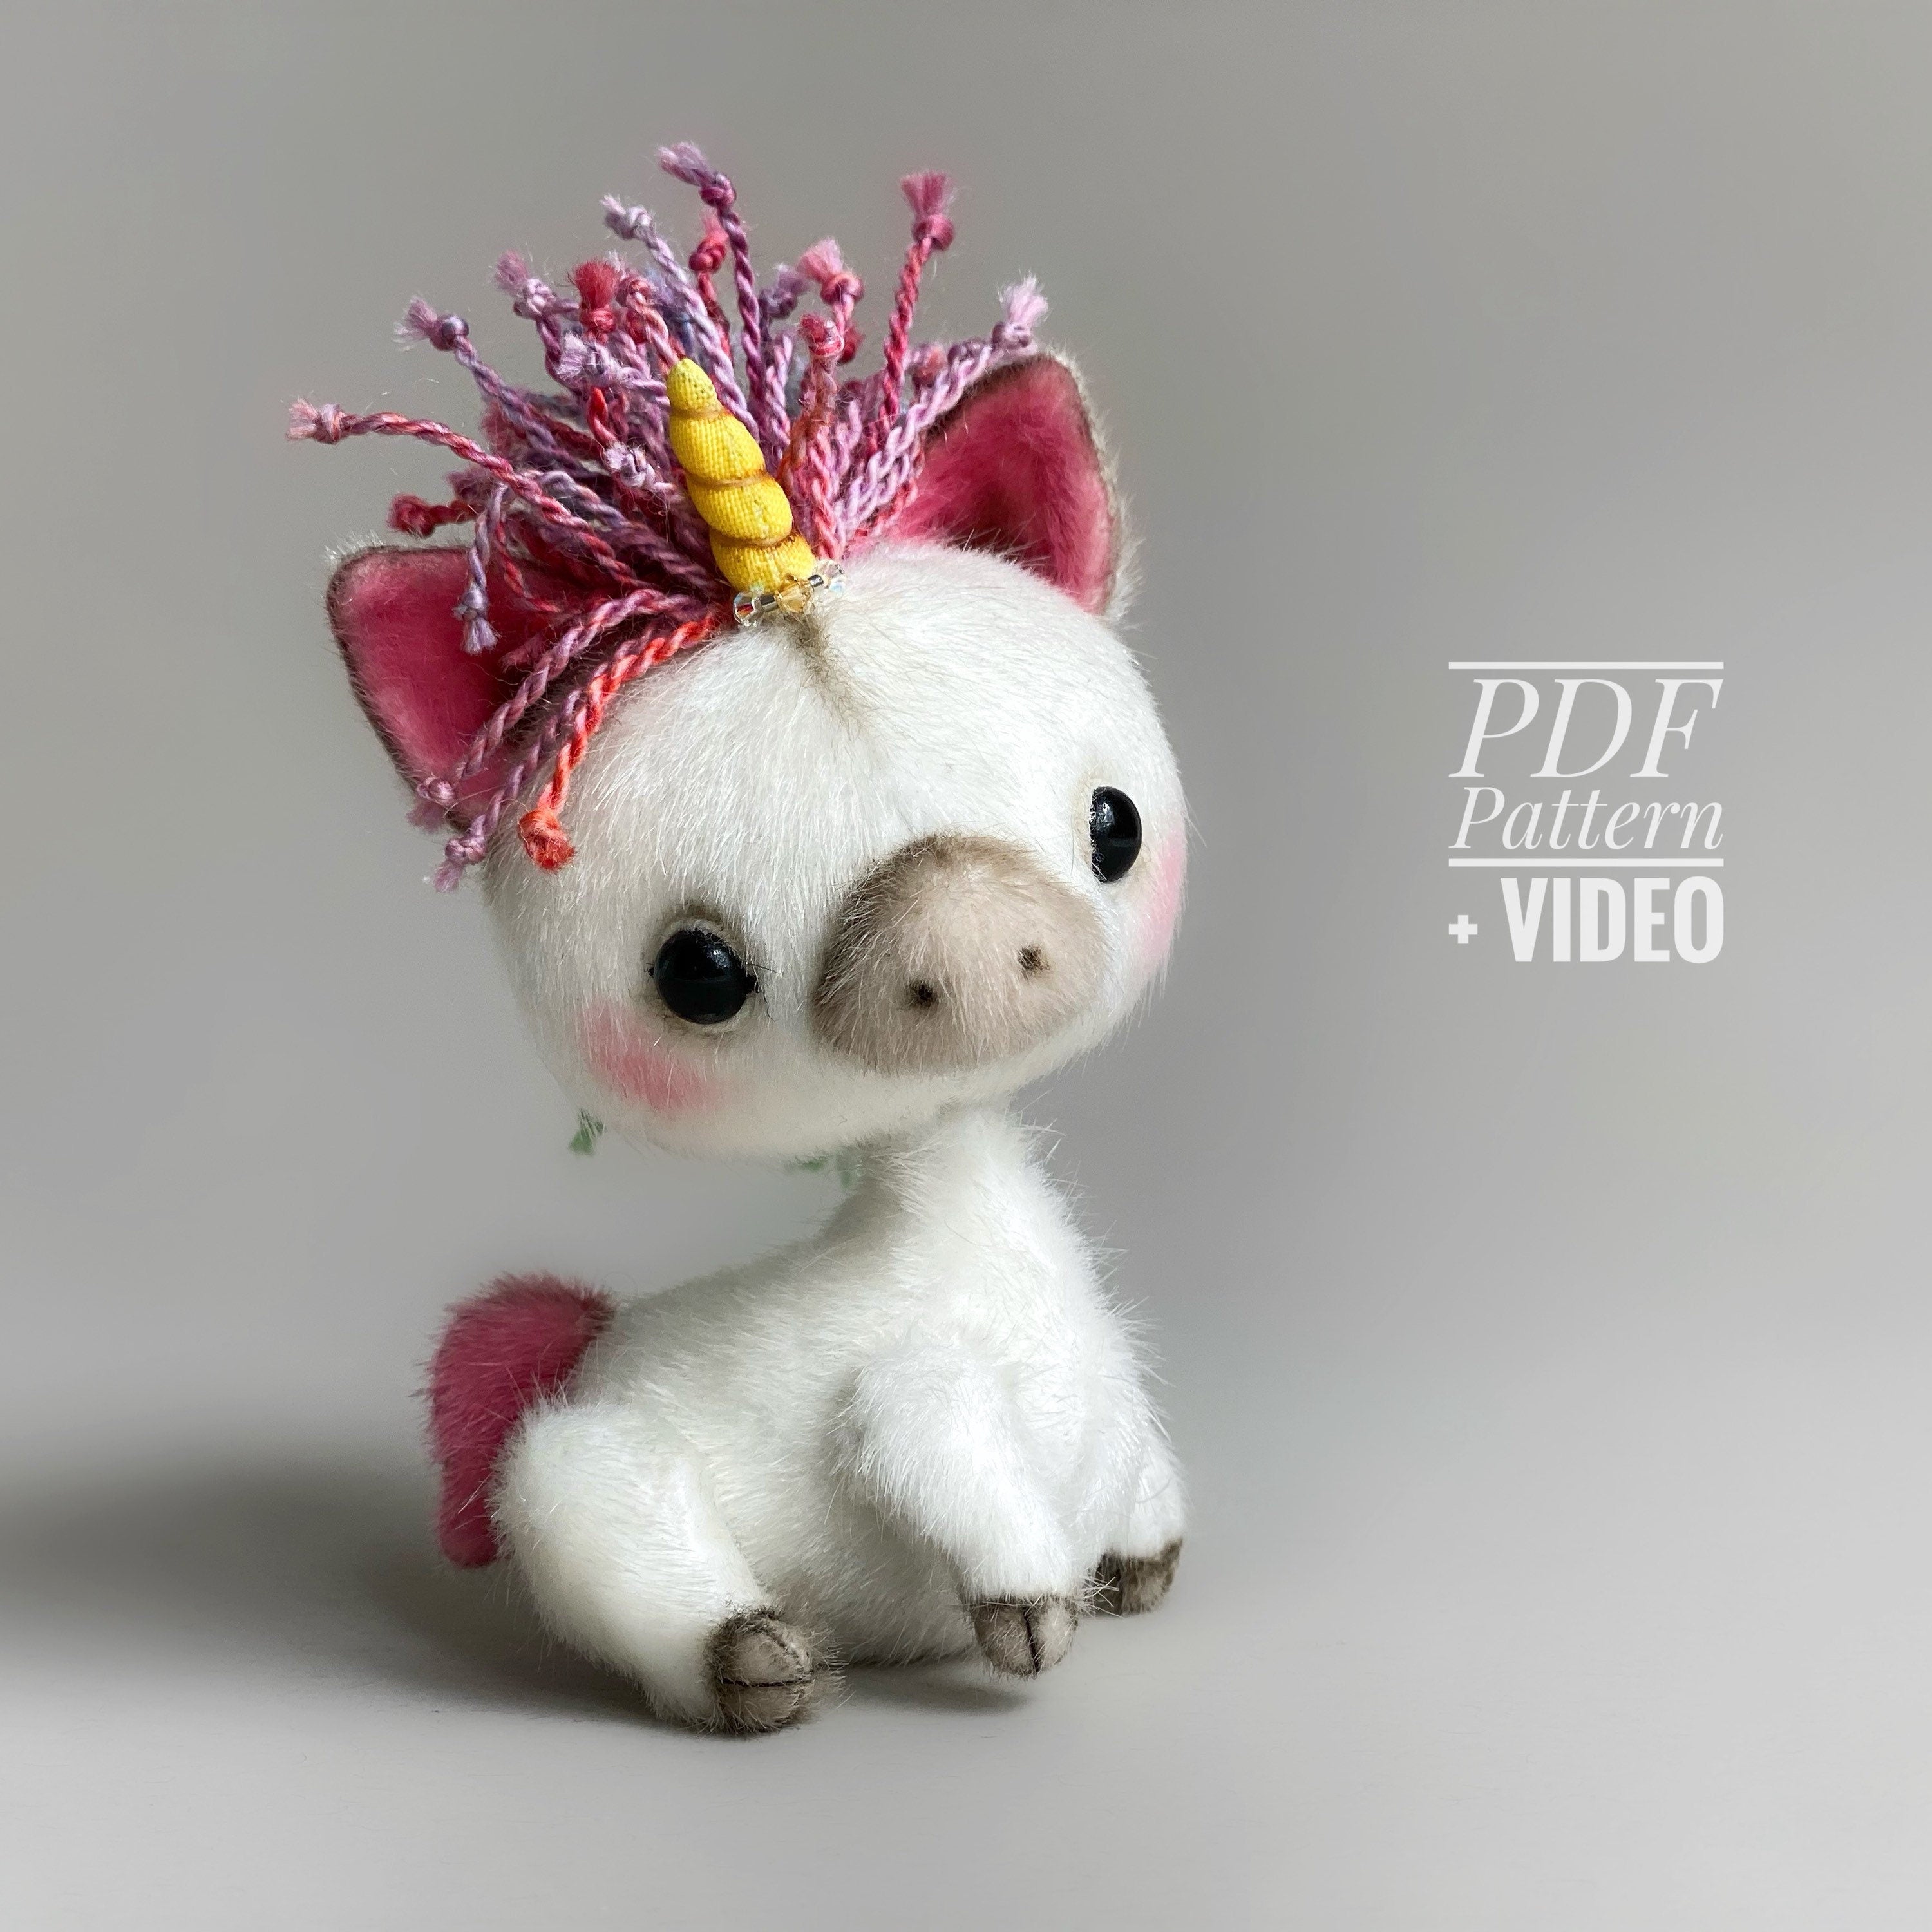 Unicorn PDF sewing pattern Video tutorial DIY stuffed toy pattern DIY horse toy kids toy pattern easy to sew for adults TSminibears